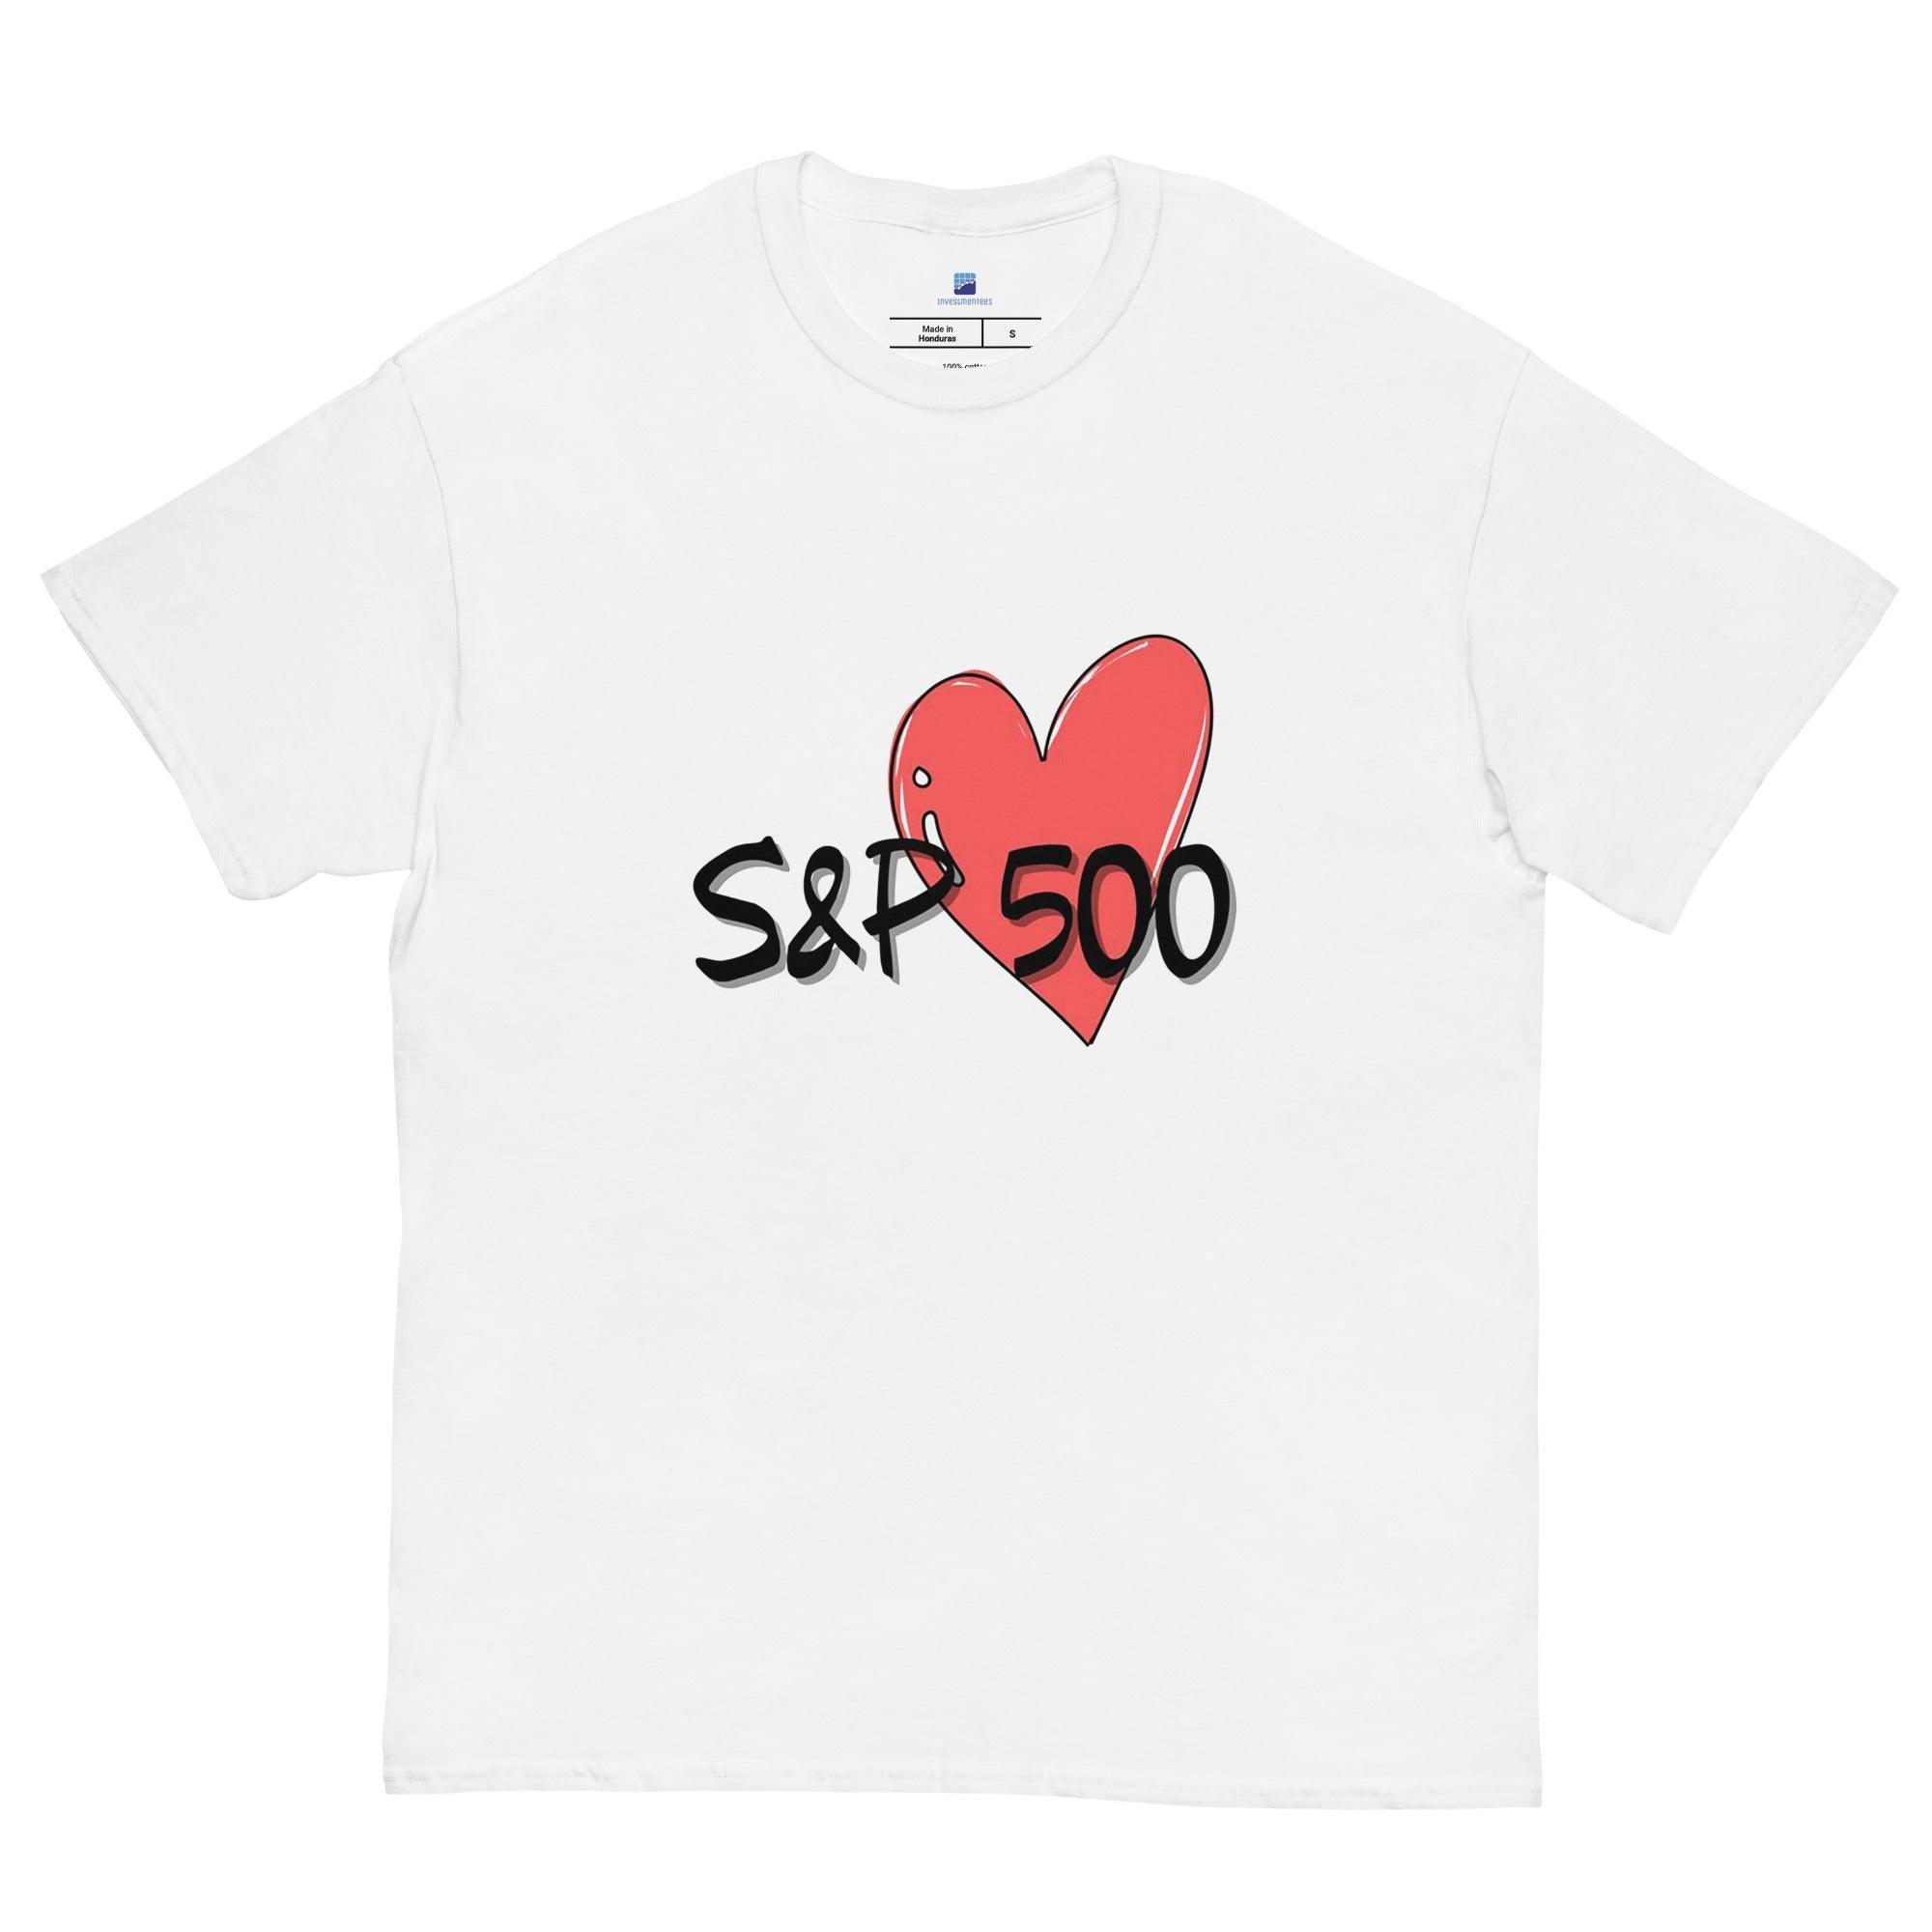 S&P 500 T-Shirt - InvestmenTees